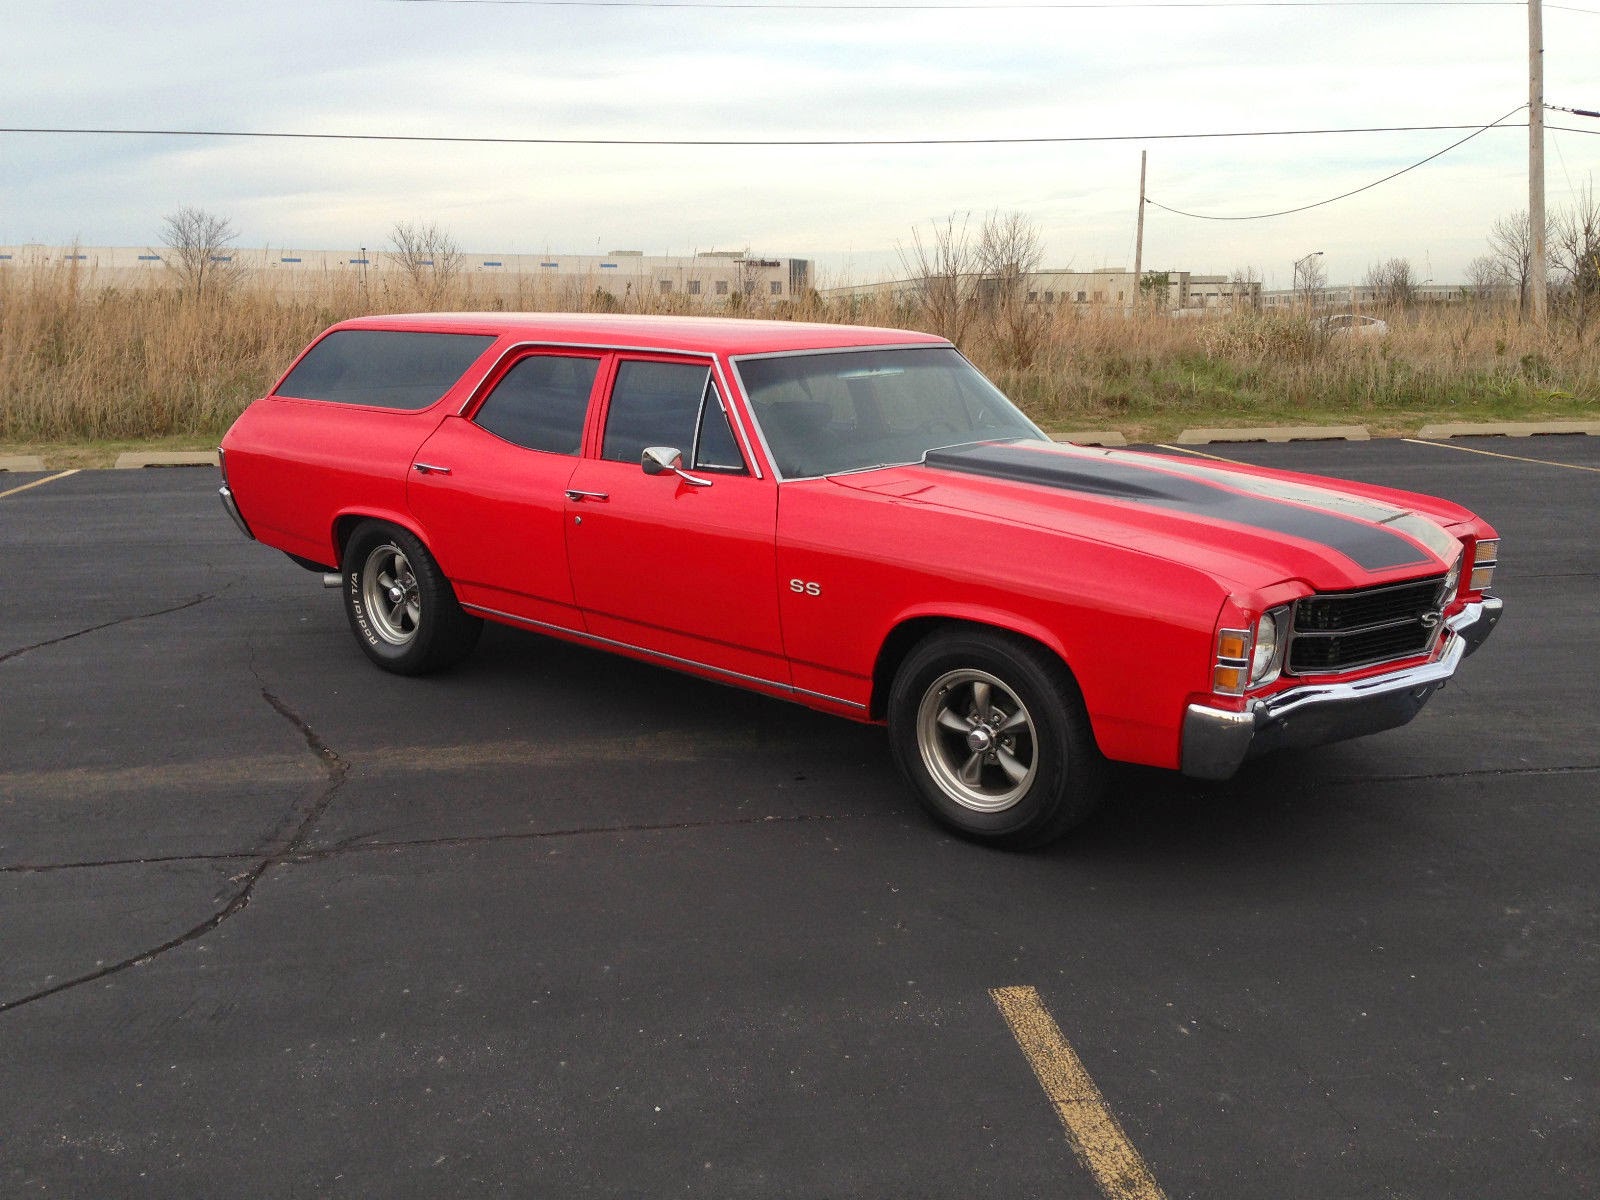 15k: Attack of the SS Clones: 1971 Chevrolet Chevelle Wagon.